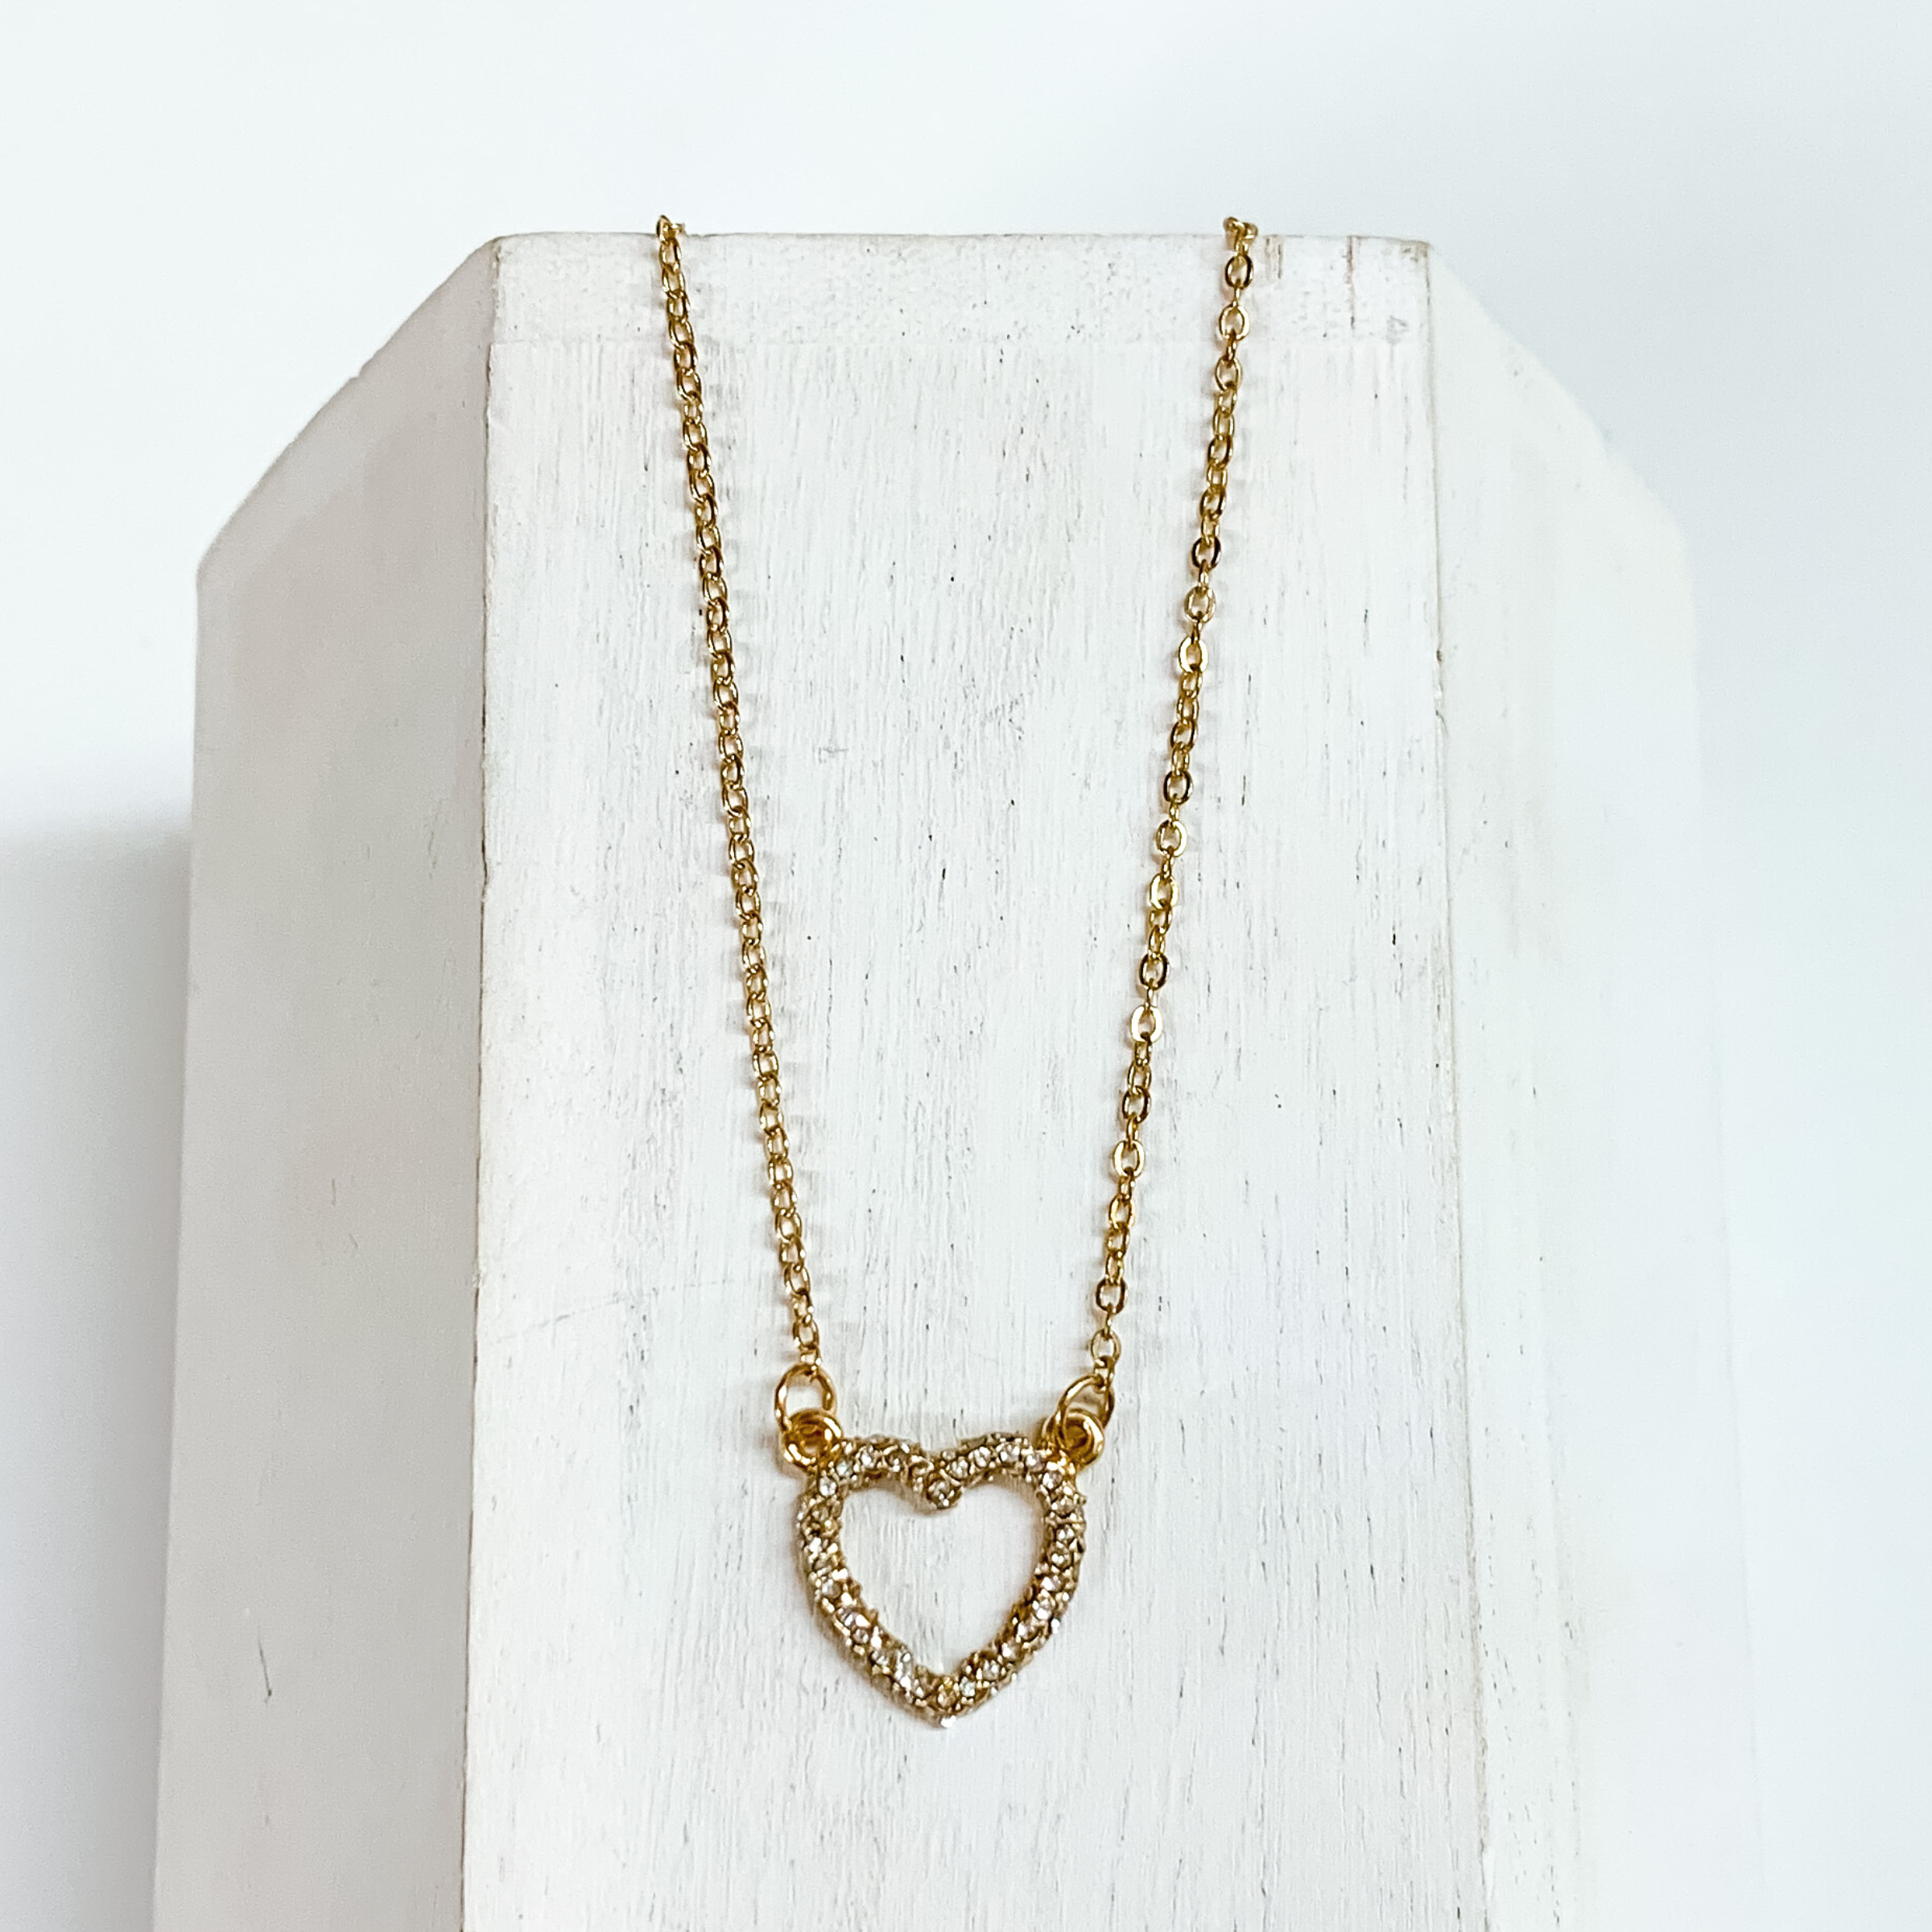 Gold chain necklace with a gold heart pendant that is encrusted with clear crystals. This necklace is laying on a white block on a white background. 